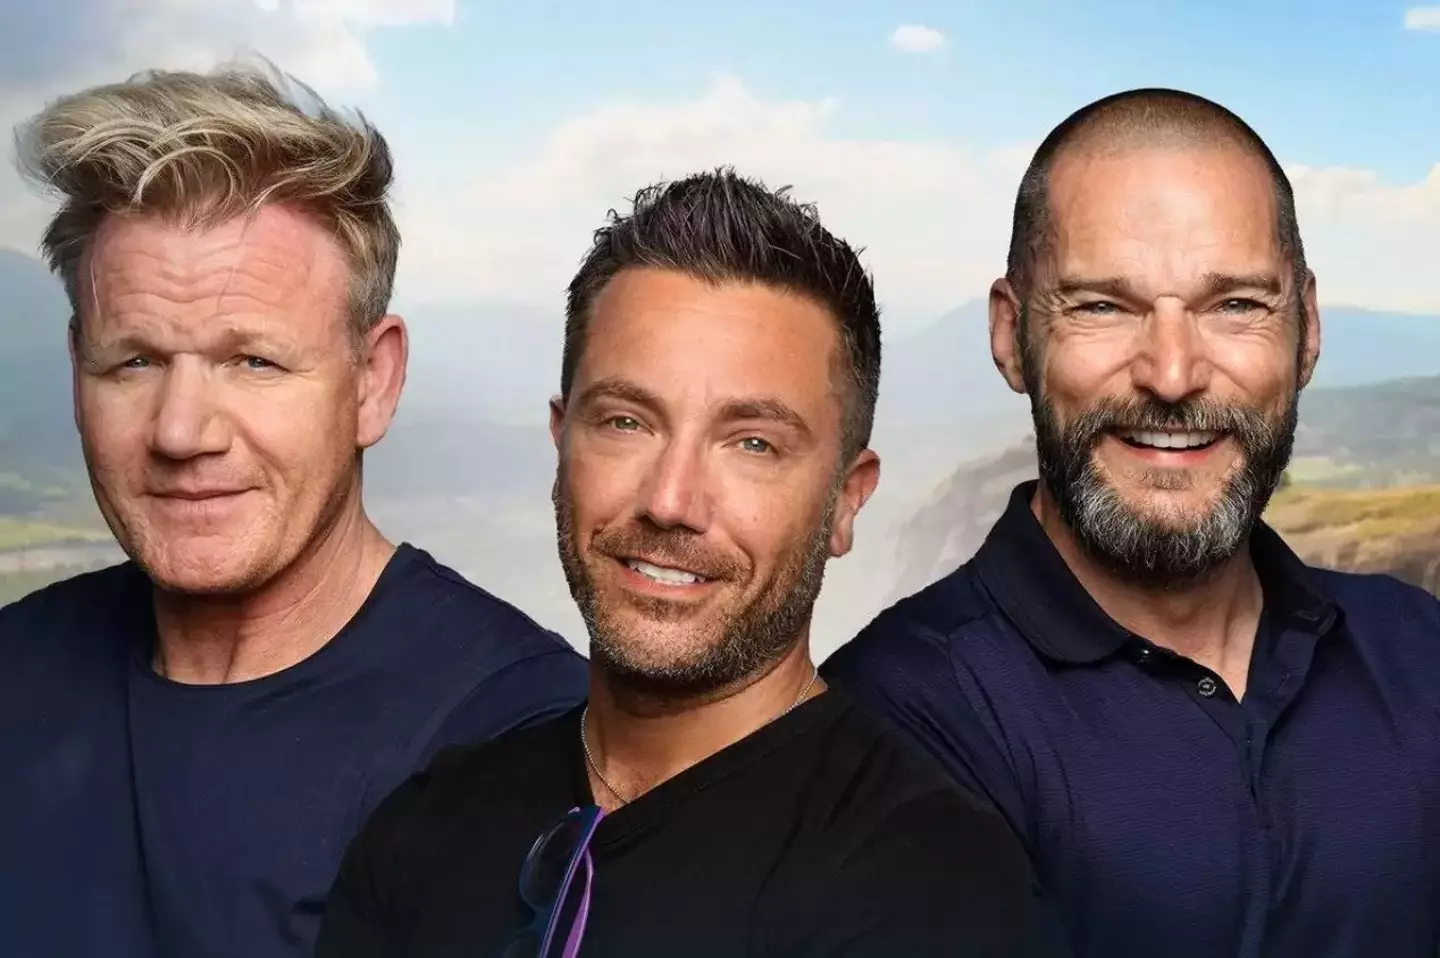 Gordon Ramsay, Gino D'Acampo and Fred Sirieix starred in Gordon, Gino and Fred's Road Trip.